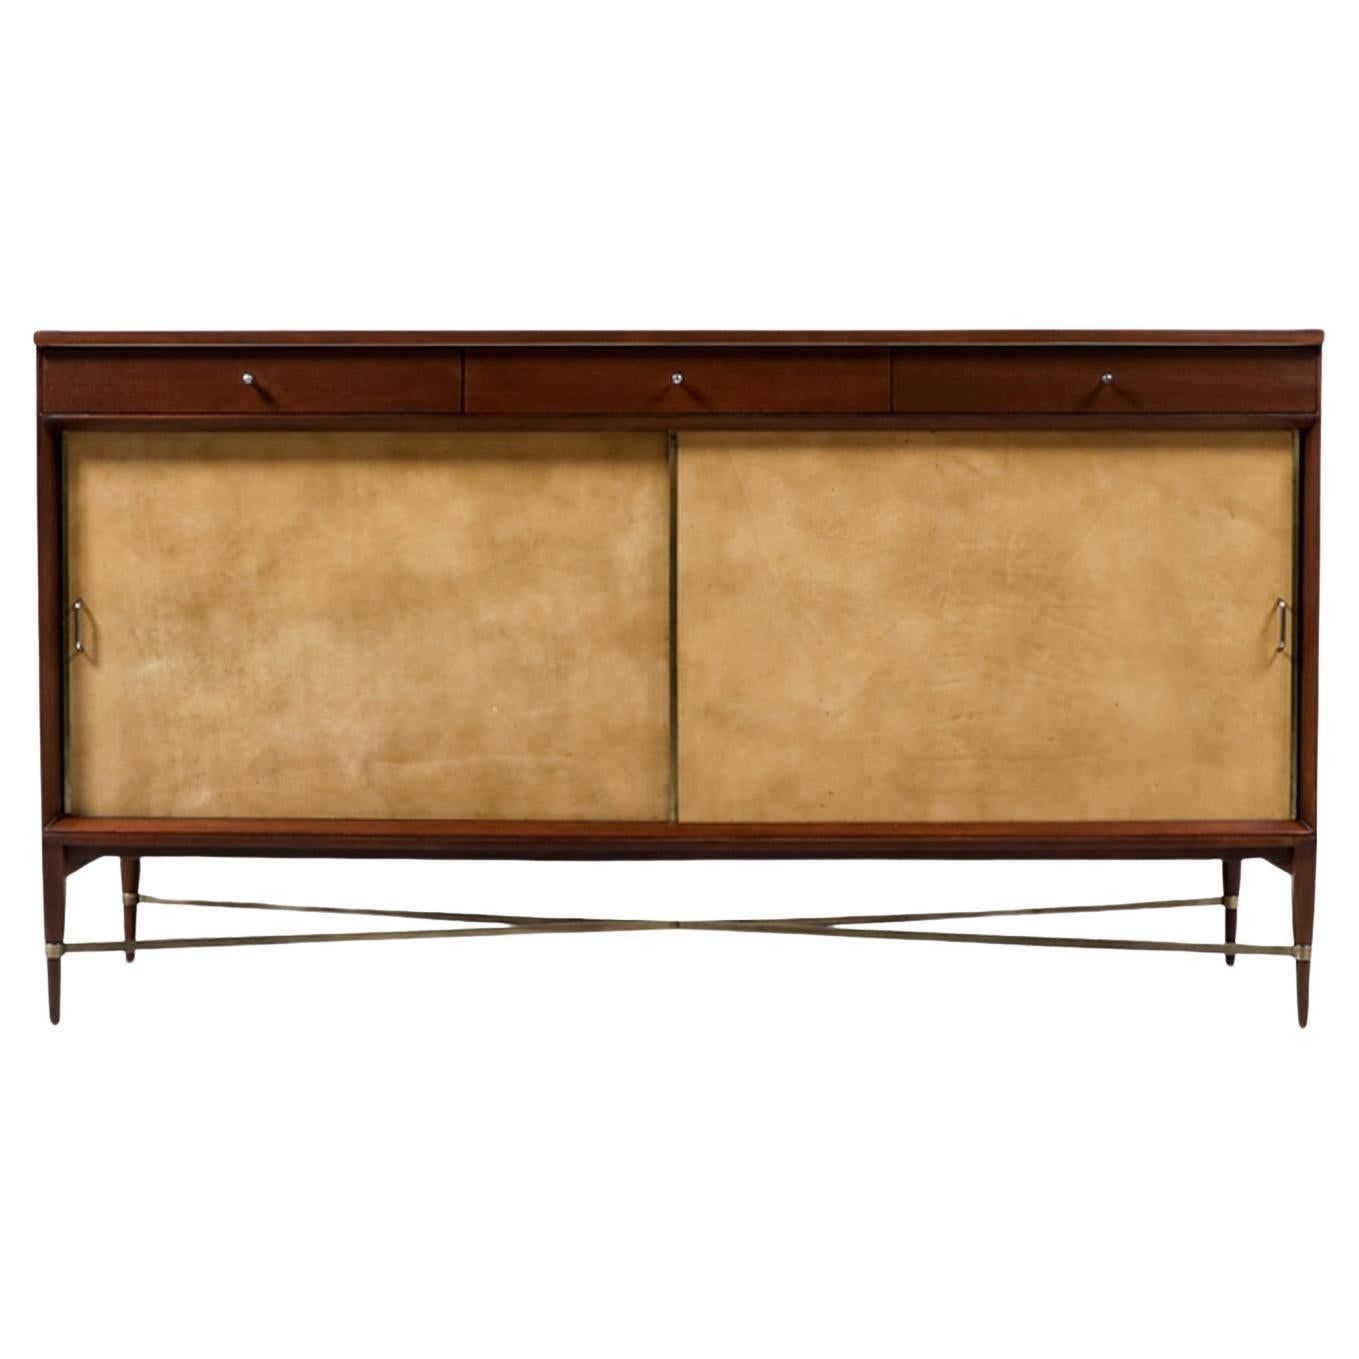 Paul McCobb "Irwin Collection" Credenza with Leather Doors & Brass Accents for C For Sale